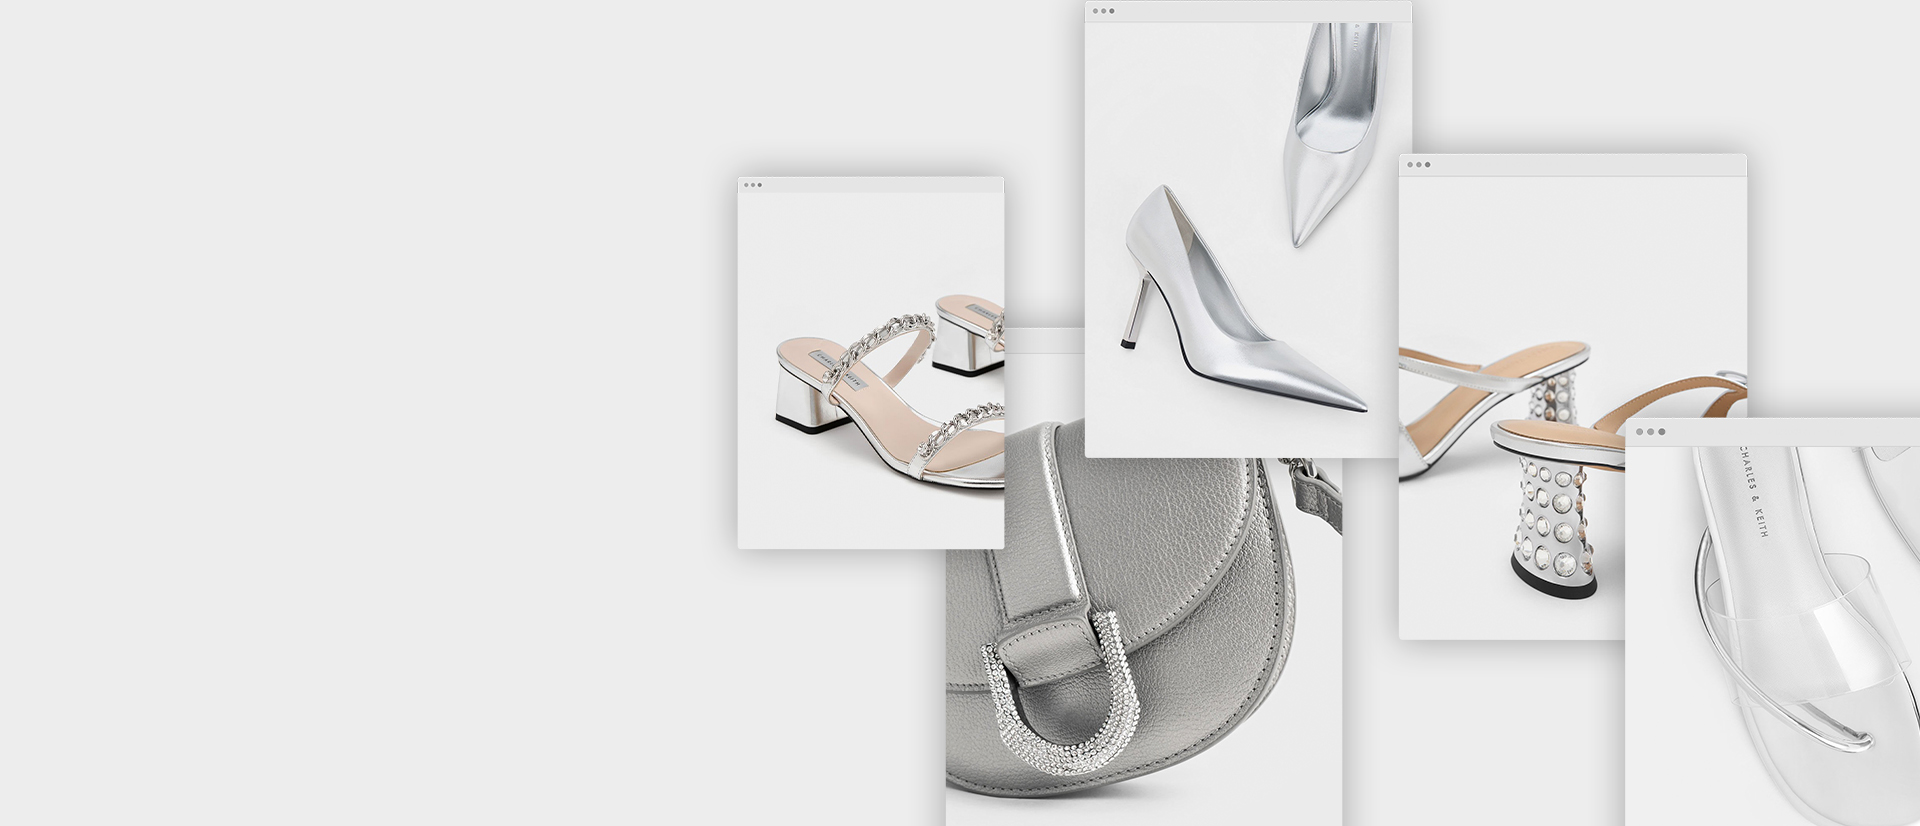 Women’s beaded heel glittered bow mules, chain-link block heel sandals, silver transparent thong sandals, Hera metallic pyramid clutch and mini Gabine leather saddle bag in pewter - CHARLES & KEITH